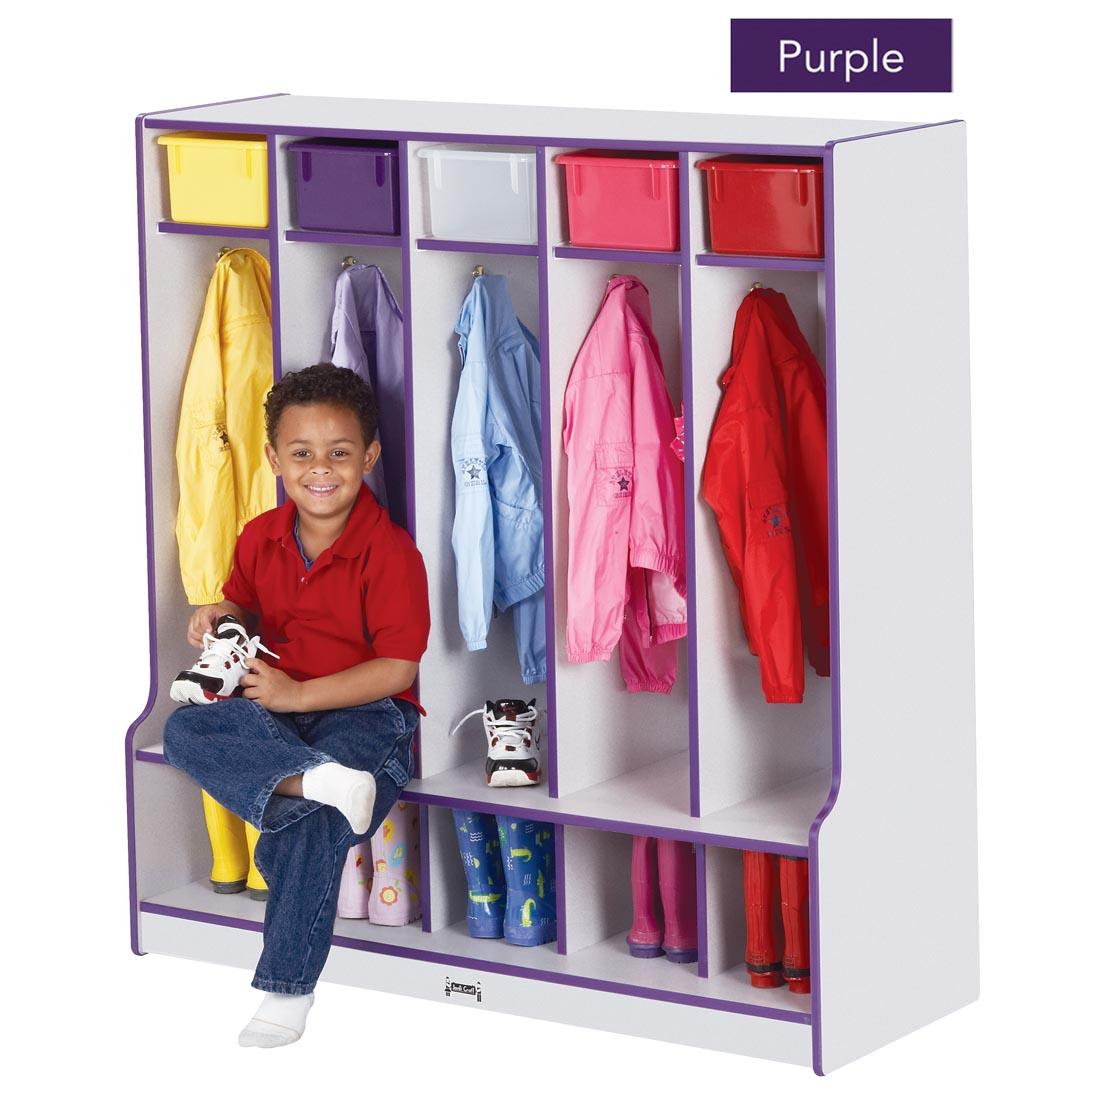 Colored Edge Coat Locker With Step with Purple text overlay